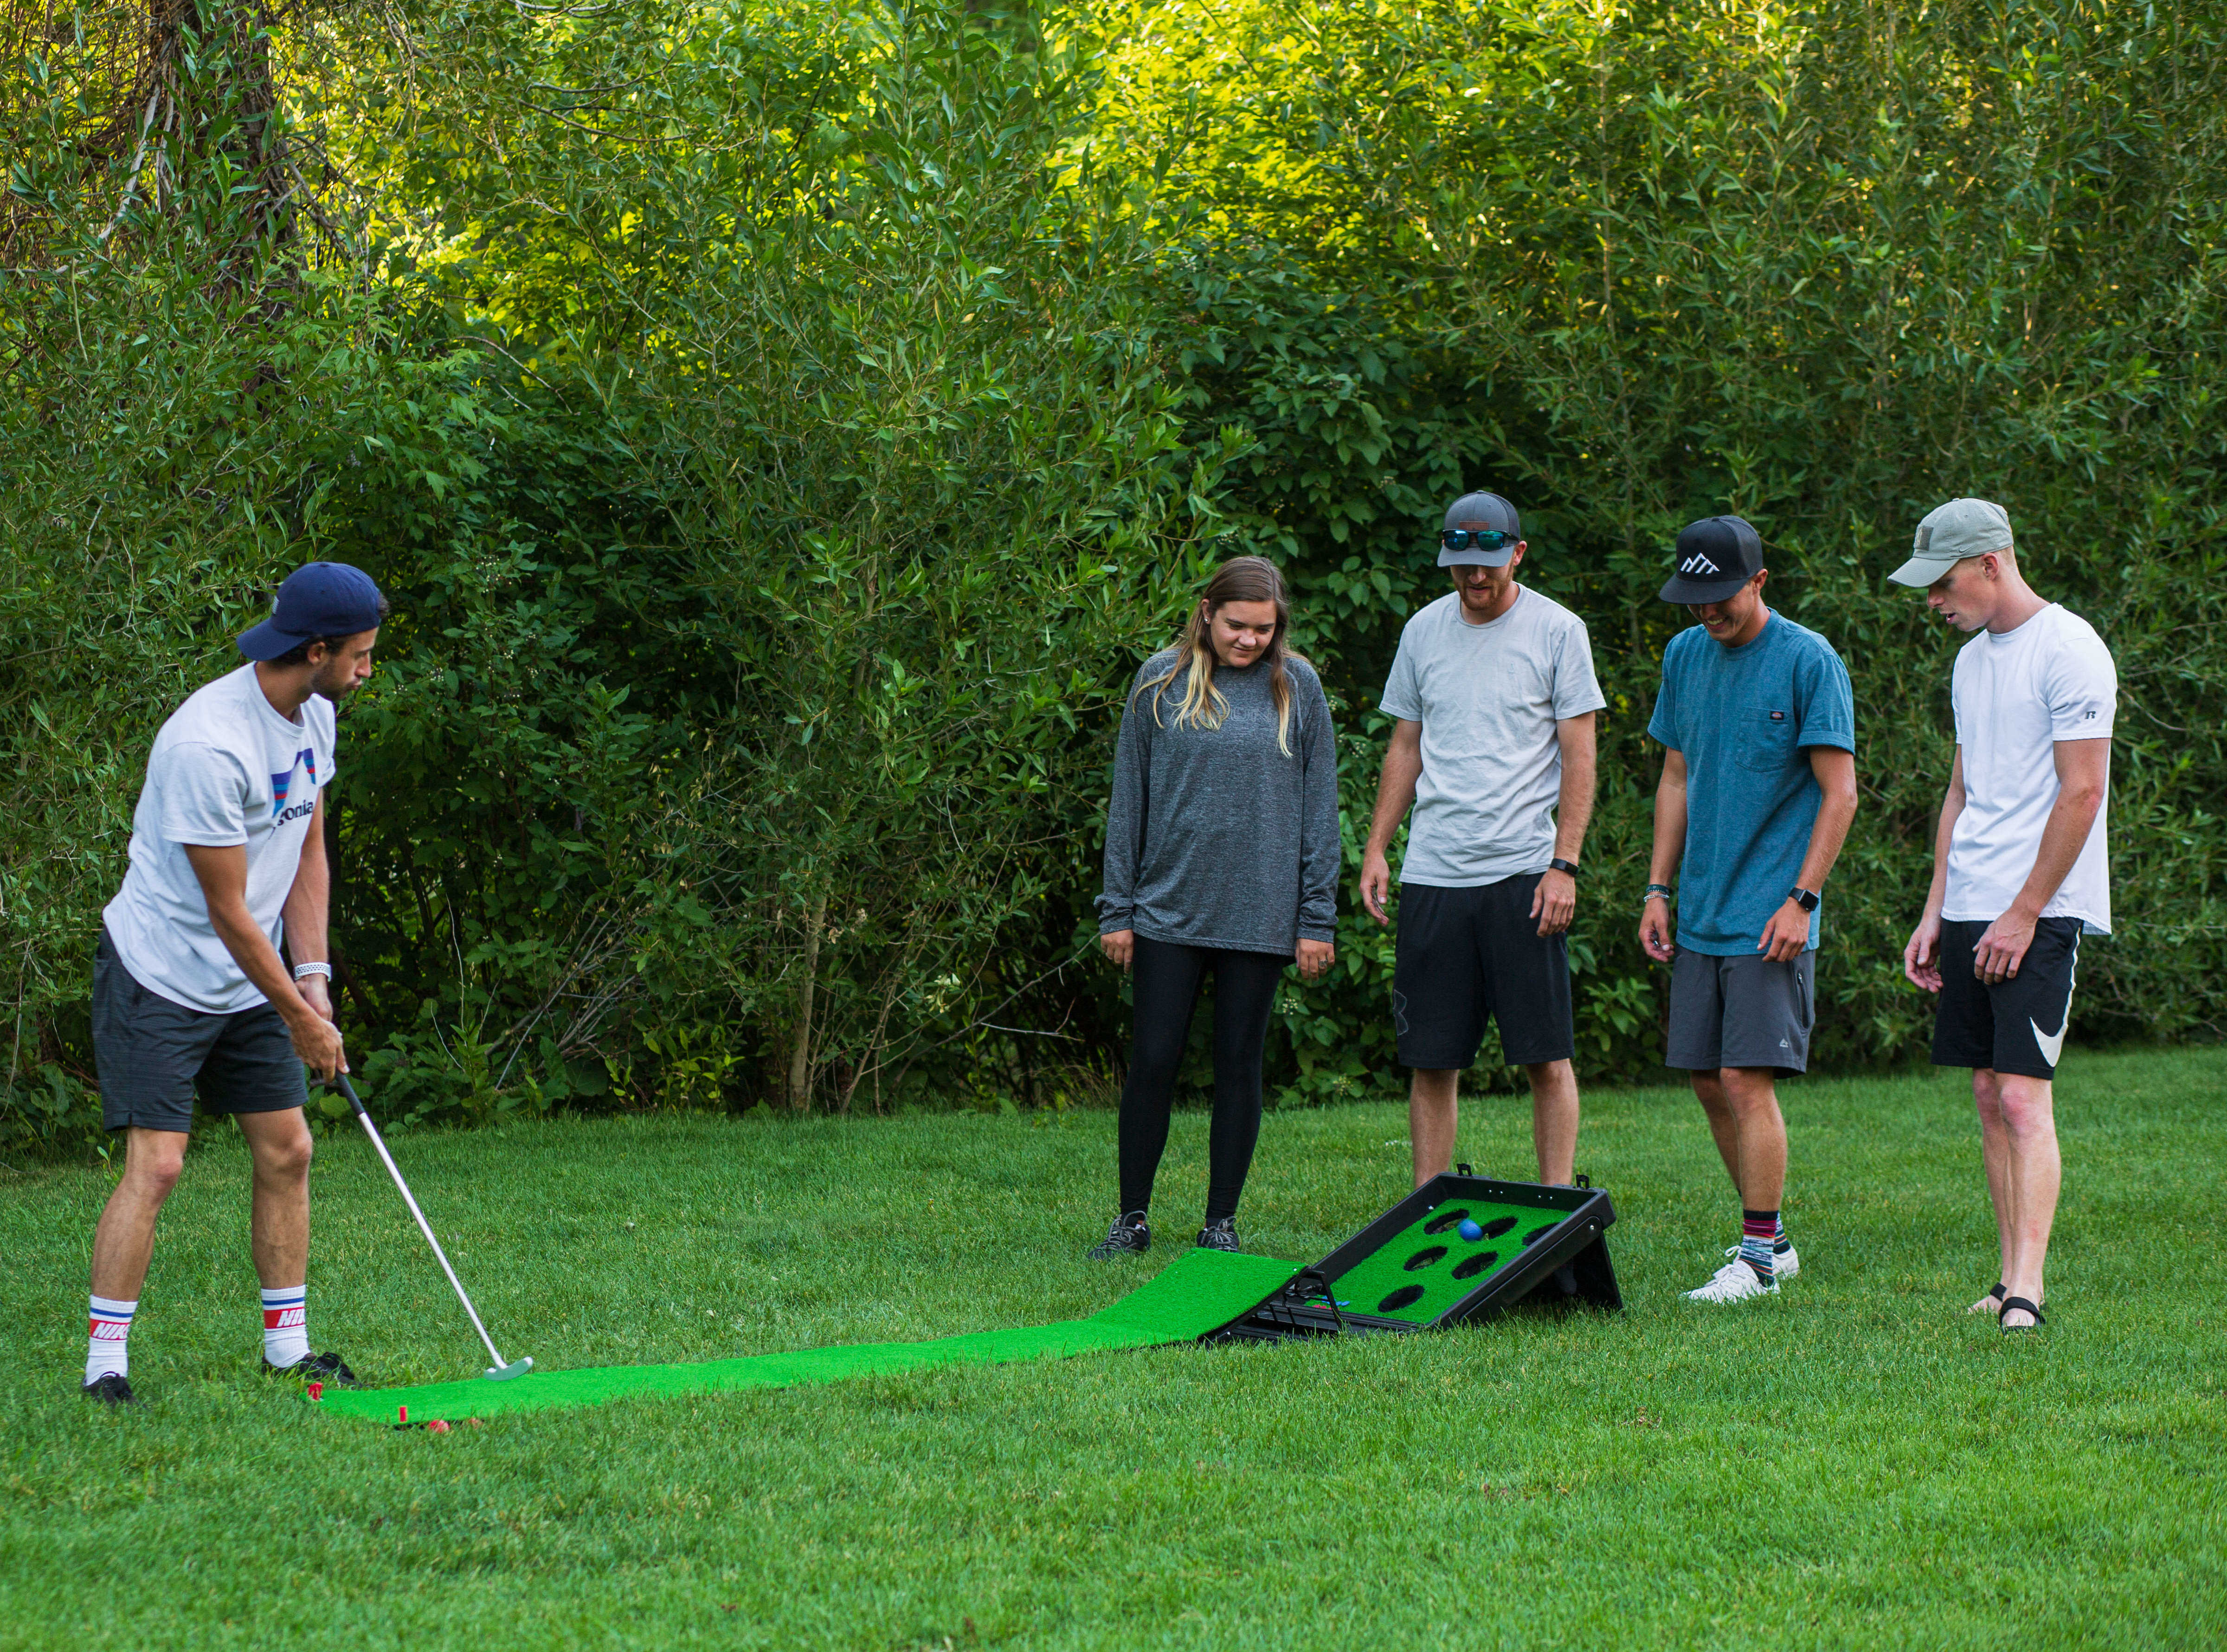 Yard Games Putter Pong With Putter And Golf Mat